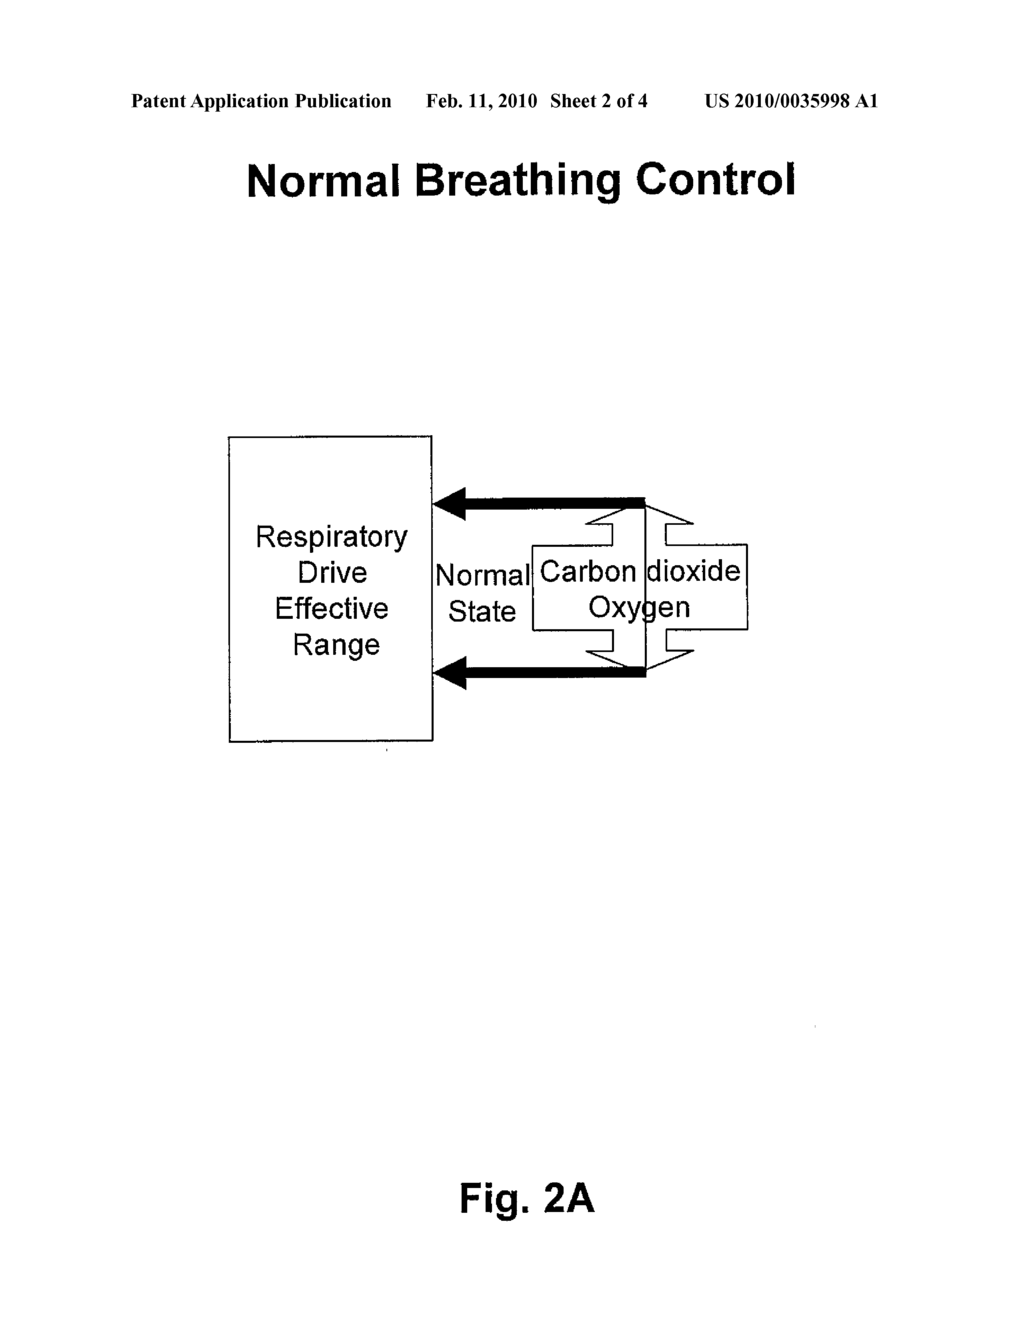 COMBINATION S-NITROSOTHIOL PHARMACEUTICAL PRODUCTS FOR RESTORING NORMAL BREATHING RHYTHMS - diagram, schematic, and image 03